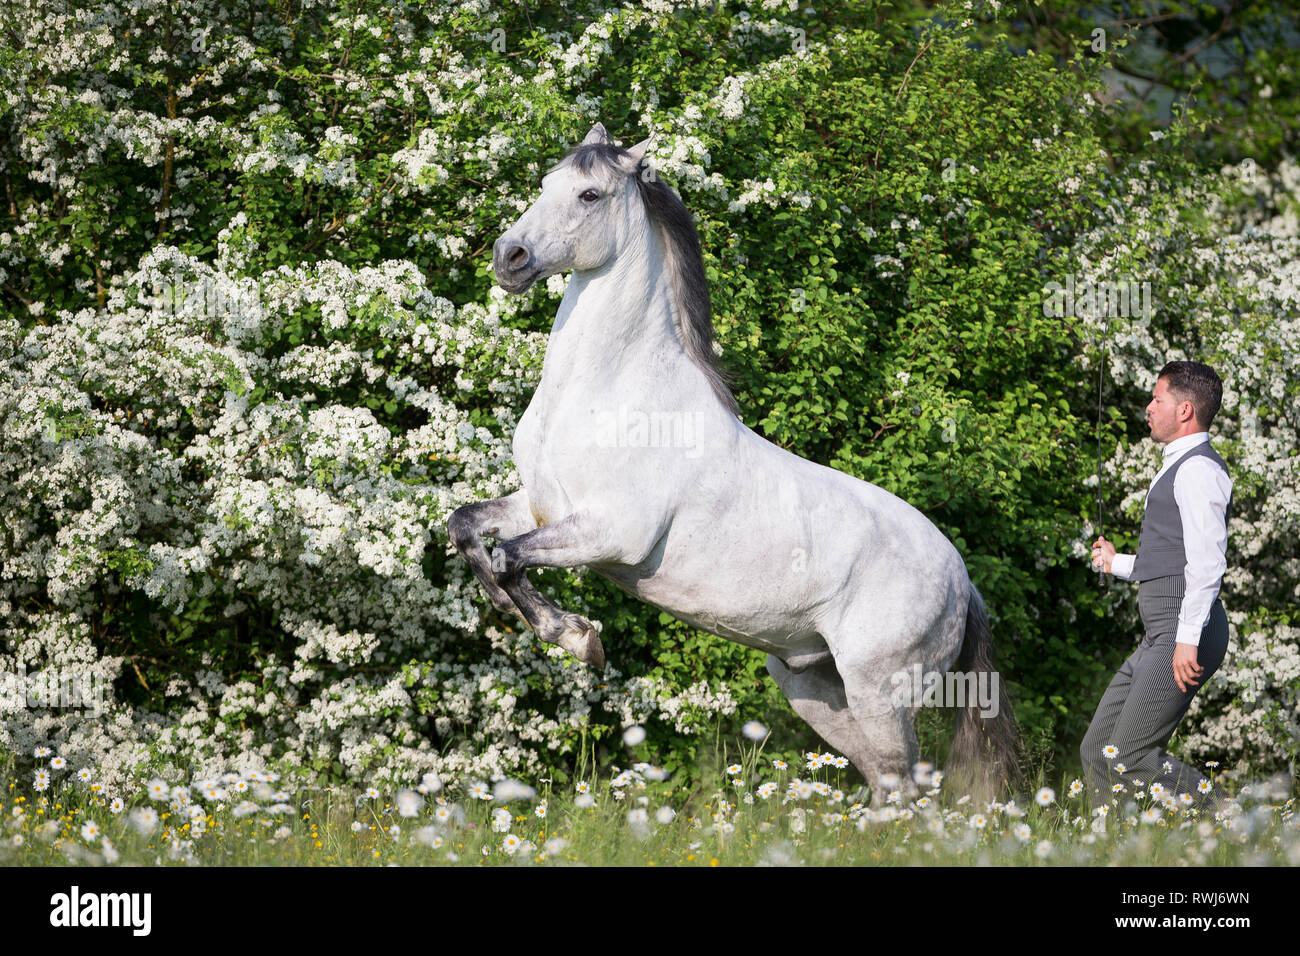 Pure Spanish Horse, Andalusian. Blind gelding rearing on a flowering meadow, next to its rider and owner Sandro Huerzeler. Switzerland Stock Photo